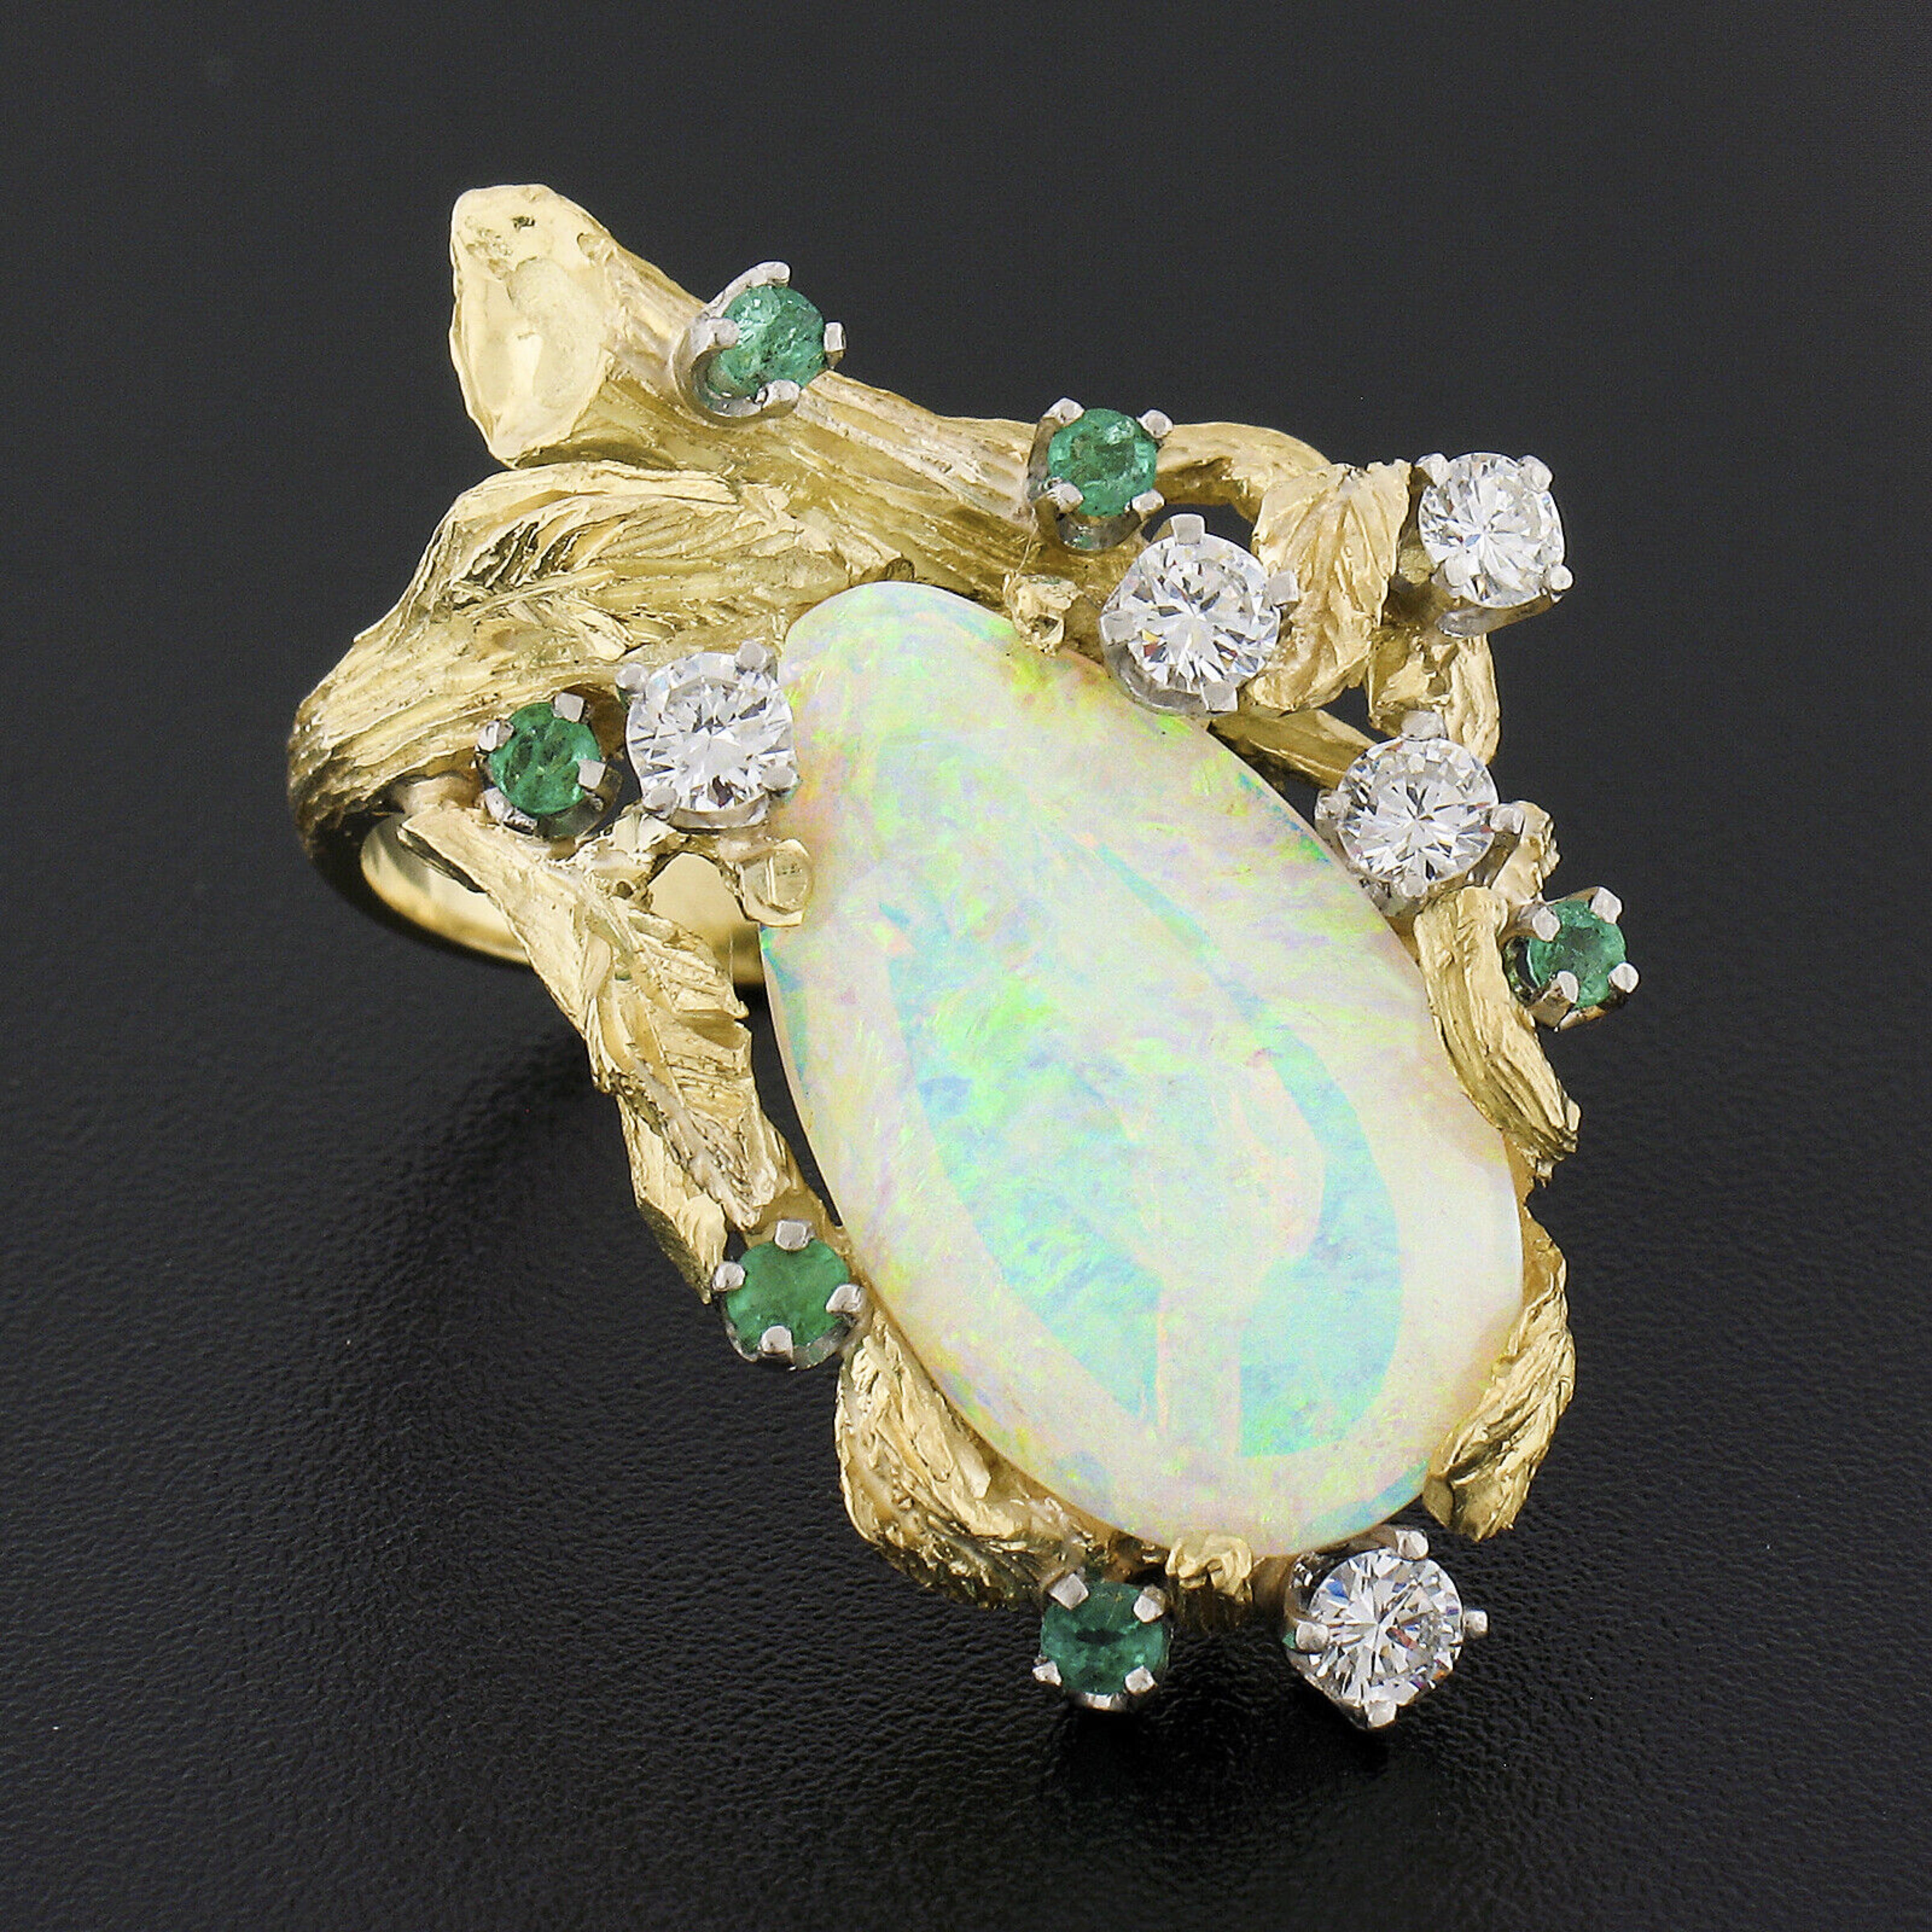 Here we have a unique vintage cocktail ring that was crafted from solid 18k yellow gold. This large and beautiful ring displays a lovely open work design with nice bark textured finish throughout the top, and features a very fine opal solitaire with